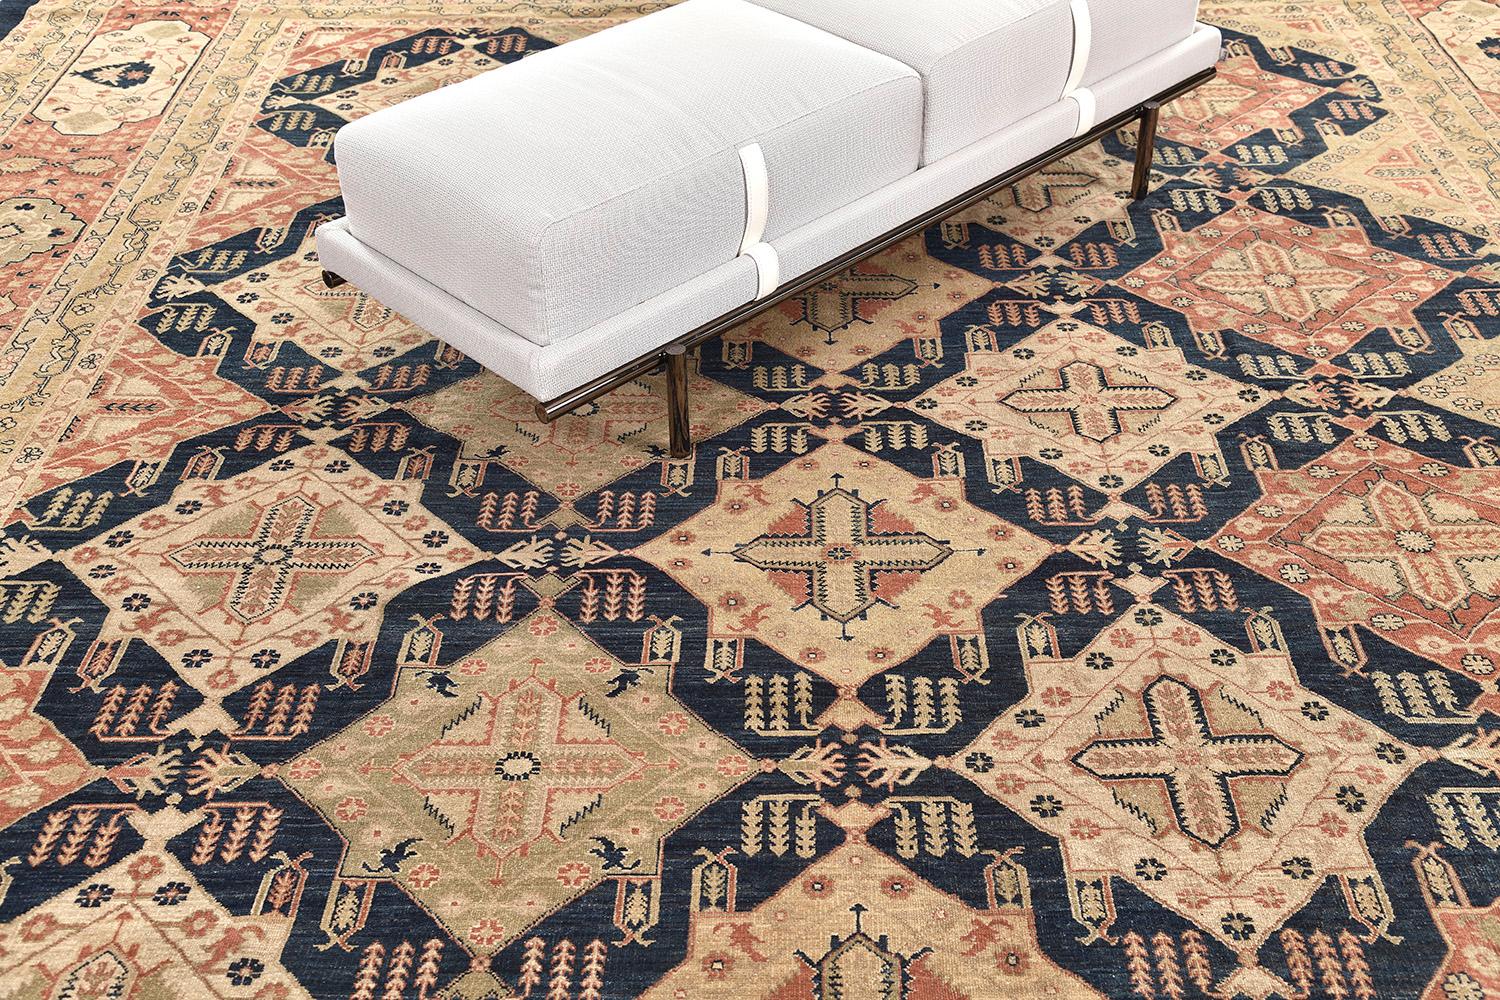 With its geometric design and mesmerizing well-balanced symmetry, this Natural Dye Antique Revival would bring a sense of understated elegance to nearly any space. The abrashed oxford blue field features a repeating design composed of lozenge